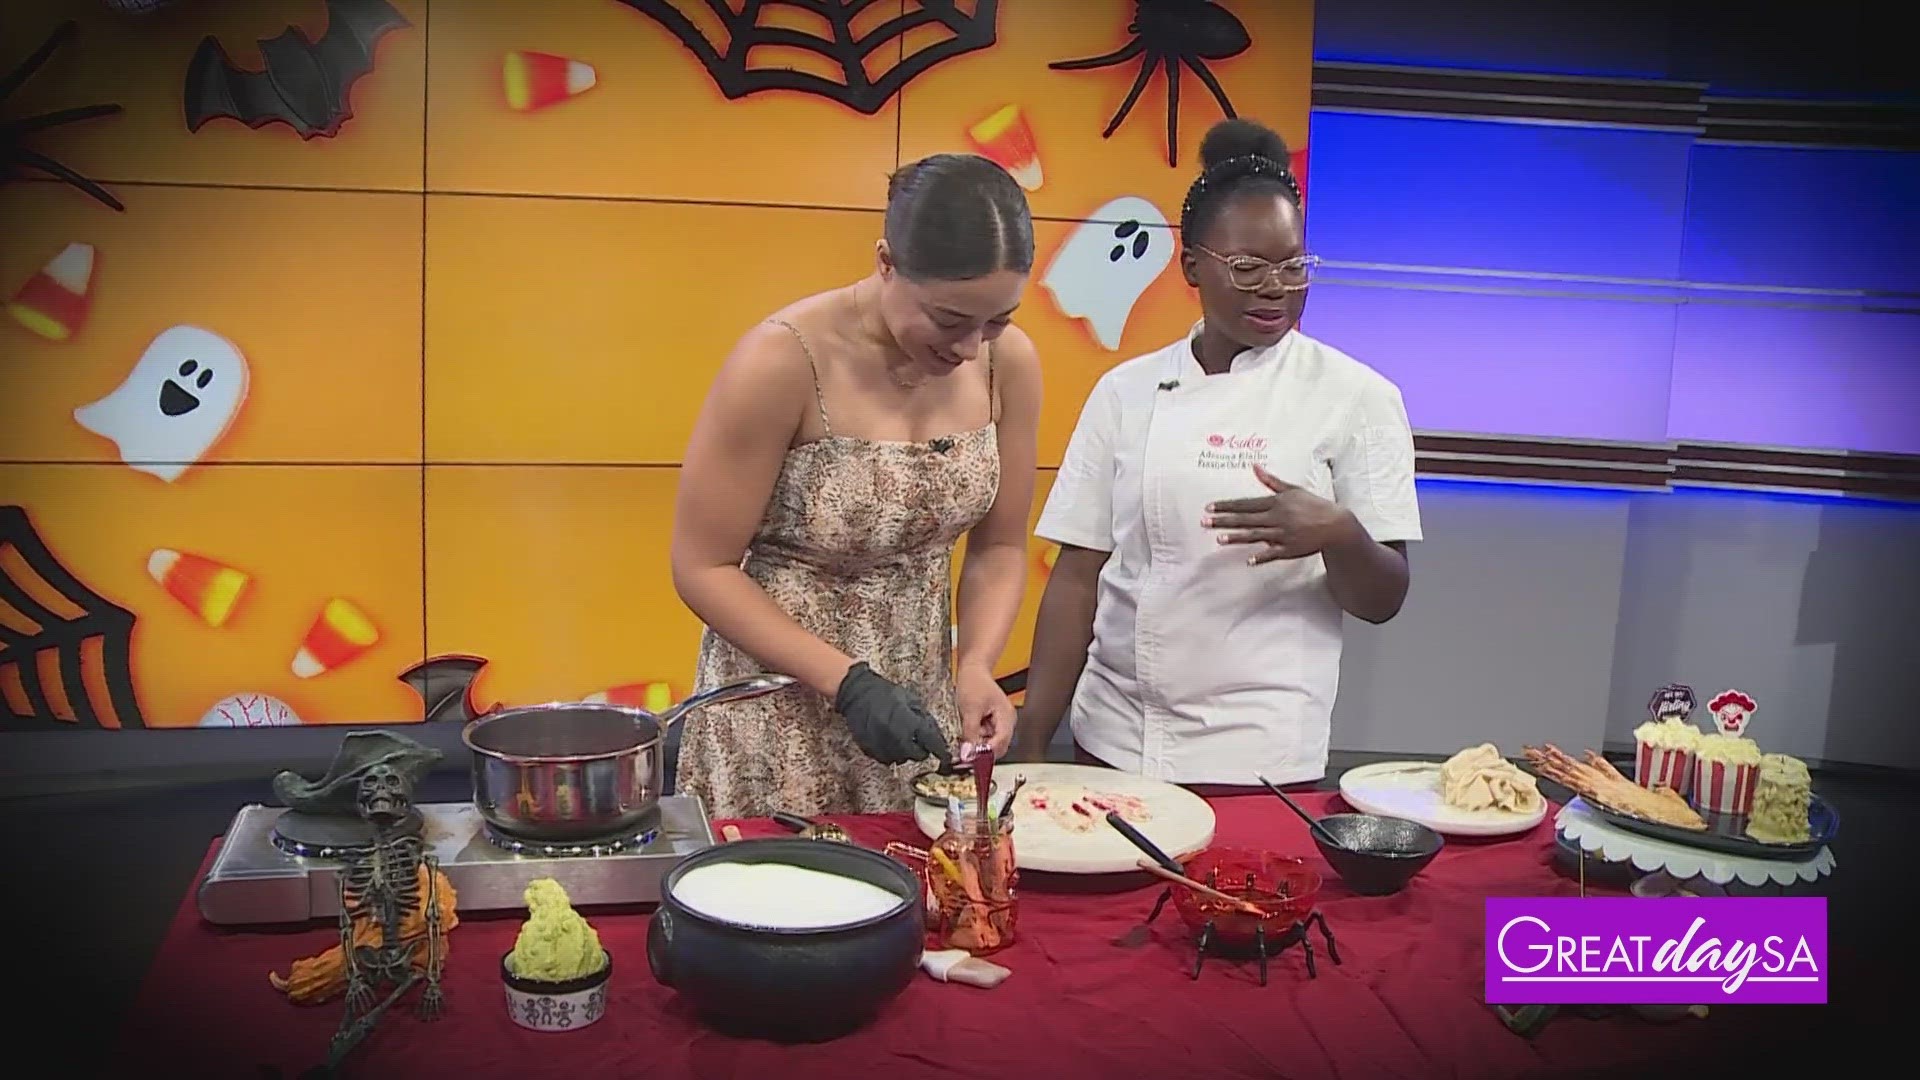 Clarke cooks up some creepy hand-shaped pies with local Food Network star Adesuwa Elaiho.